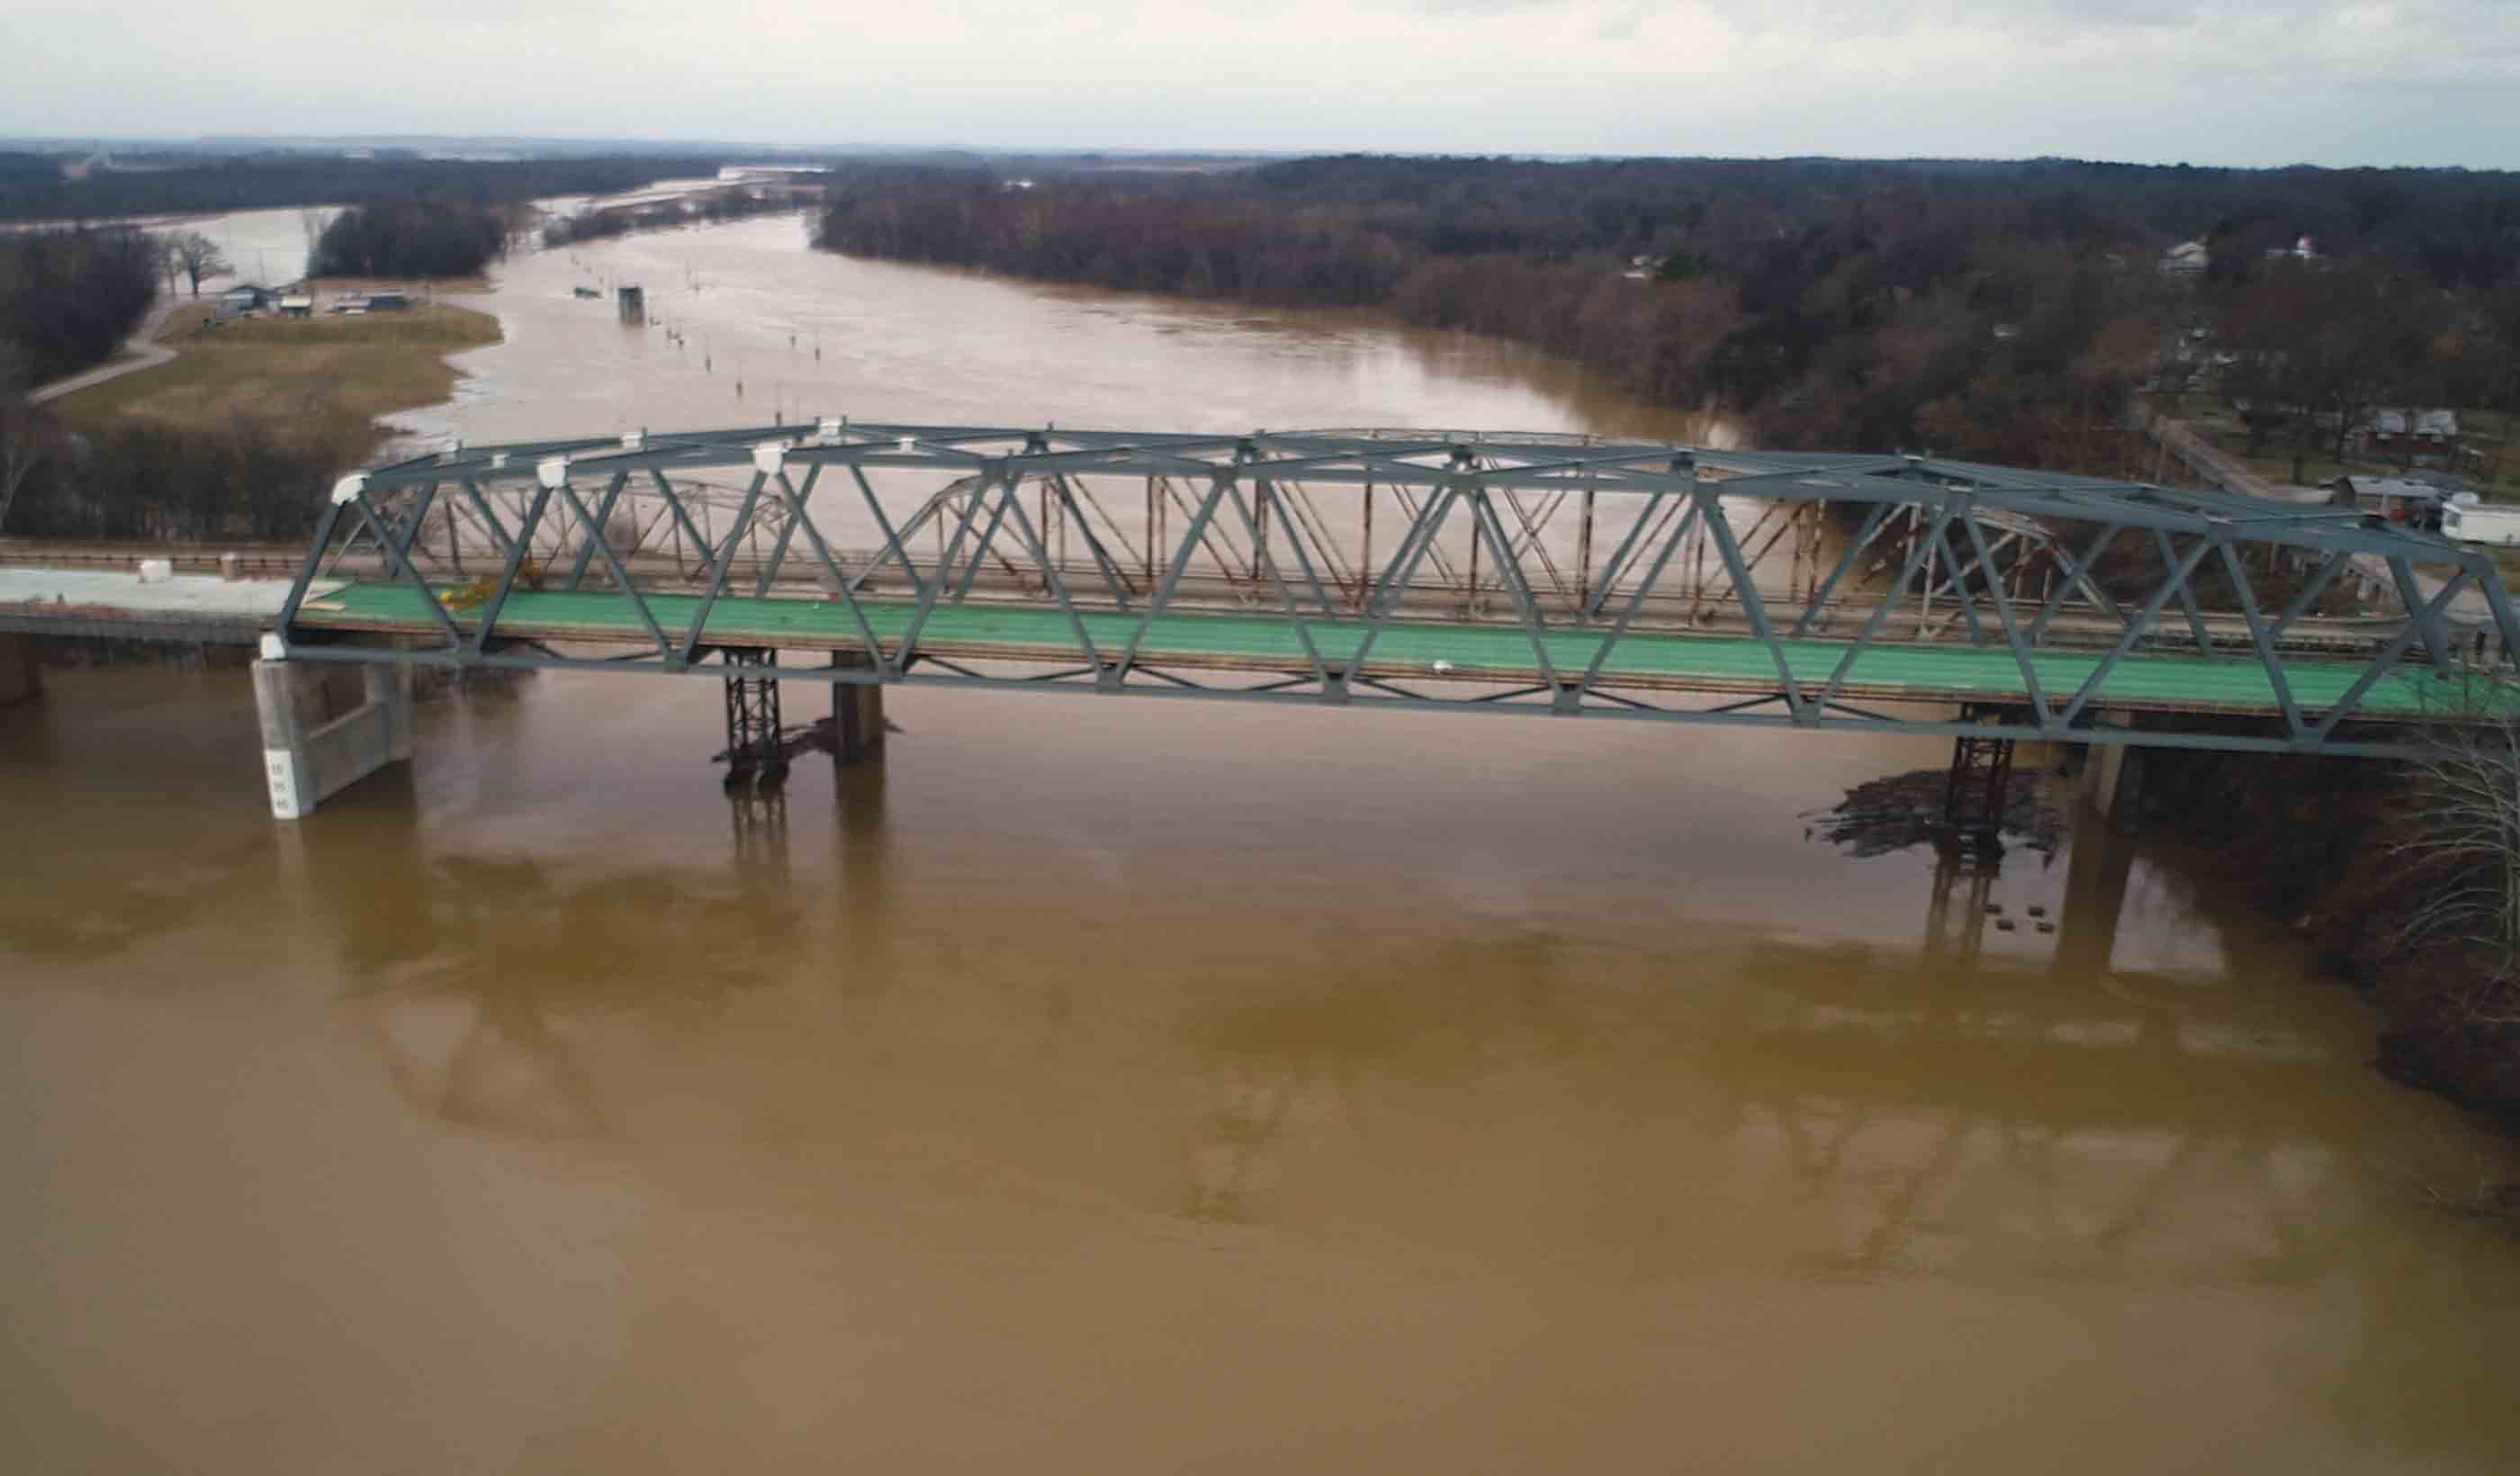 A new spin on an old bridge type for safer travel across Kentucky’s Green River